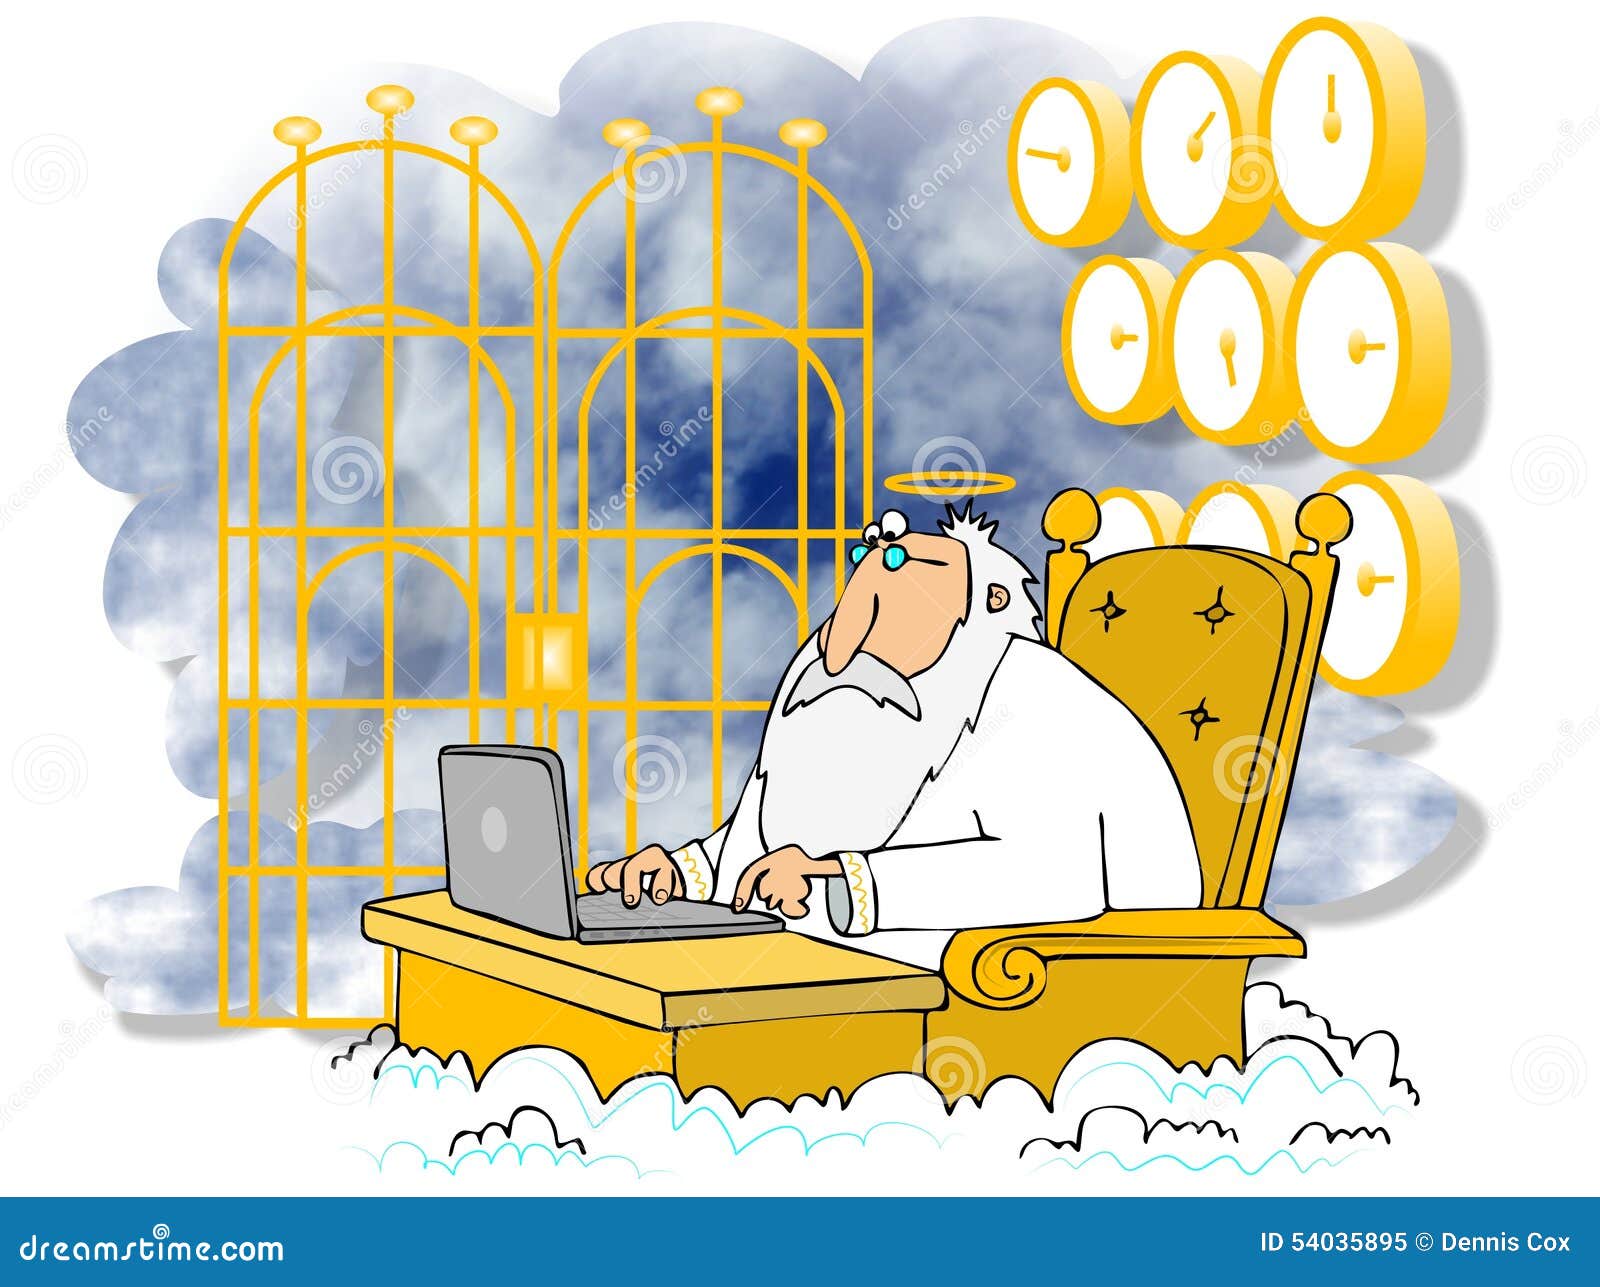 pearly gates clipart free - photo #1